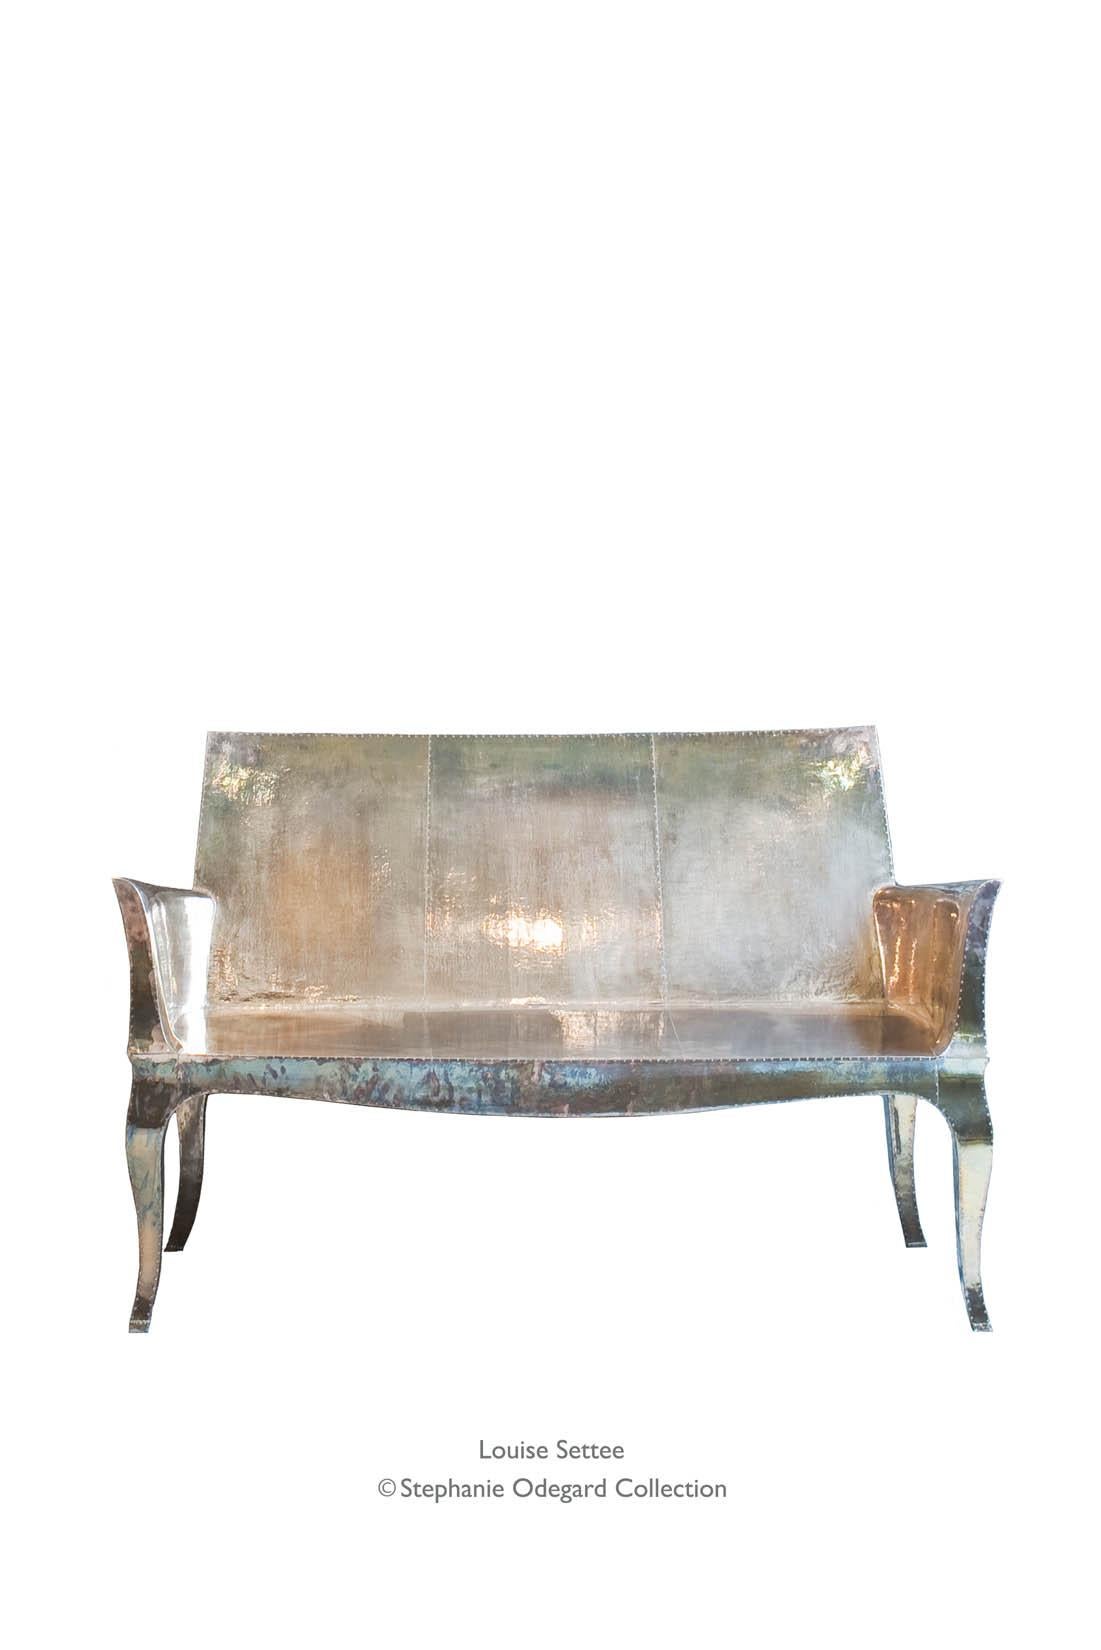 Louise Settee Art Deco Daybeds in Mid. Hammered Brass by Paul Mathieu For Sale 6